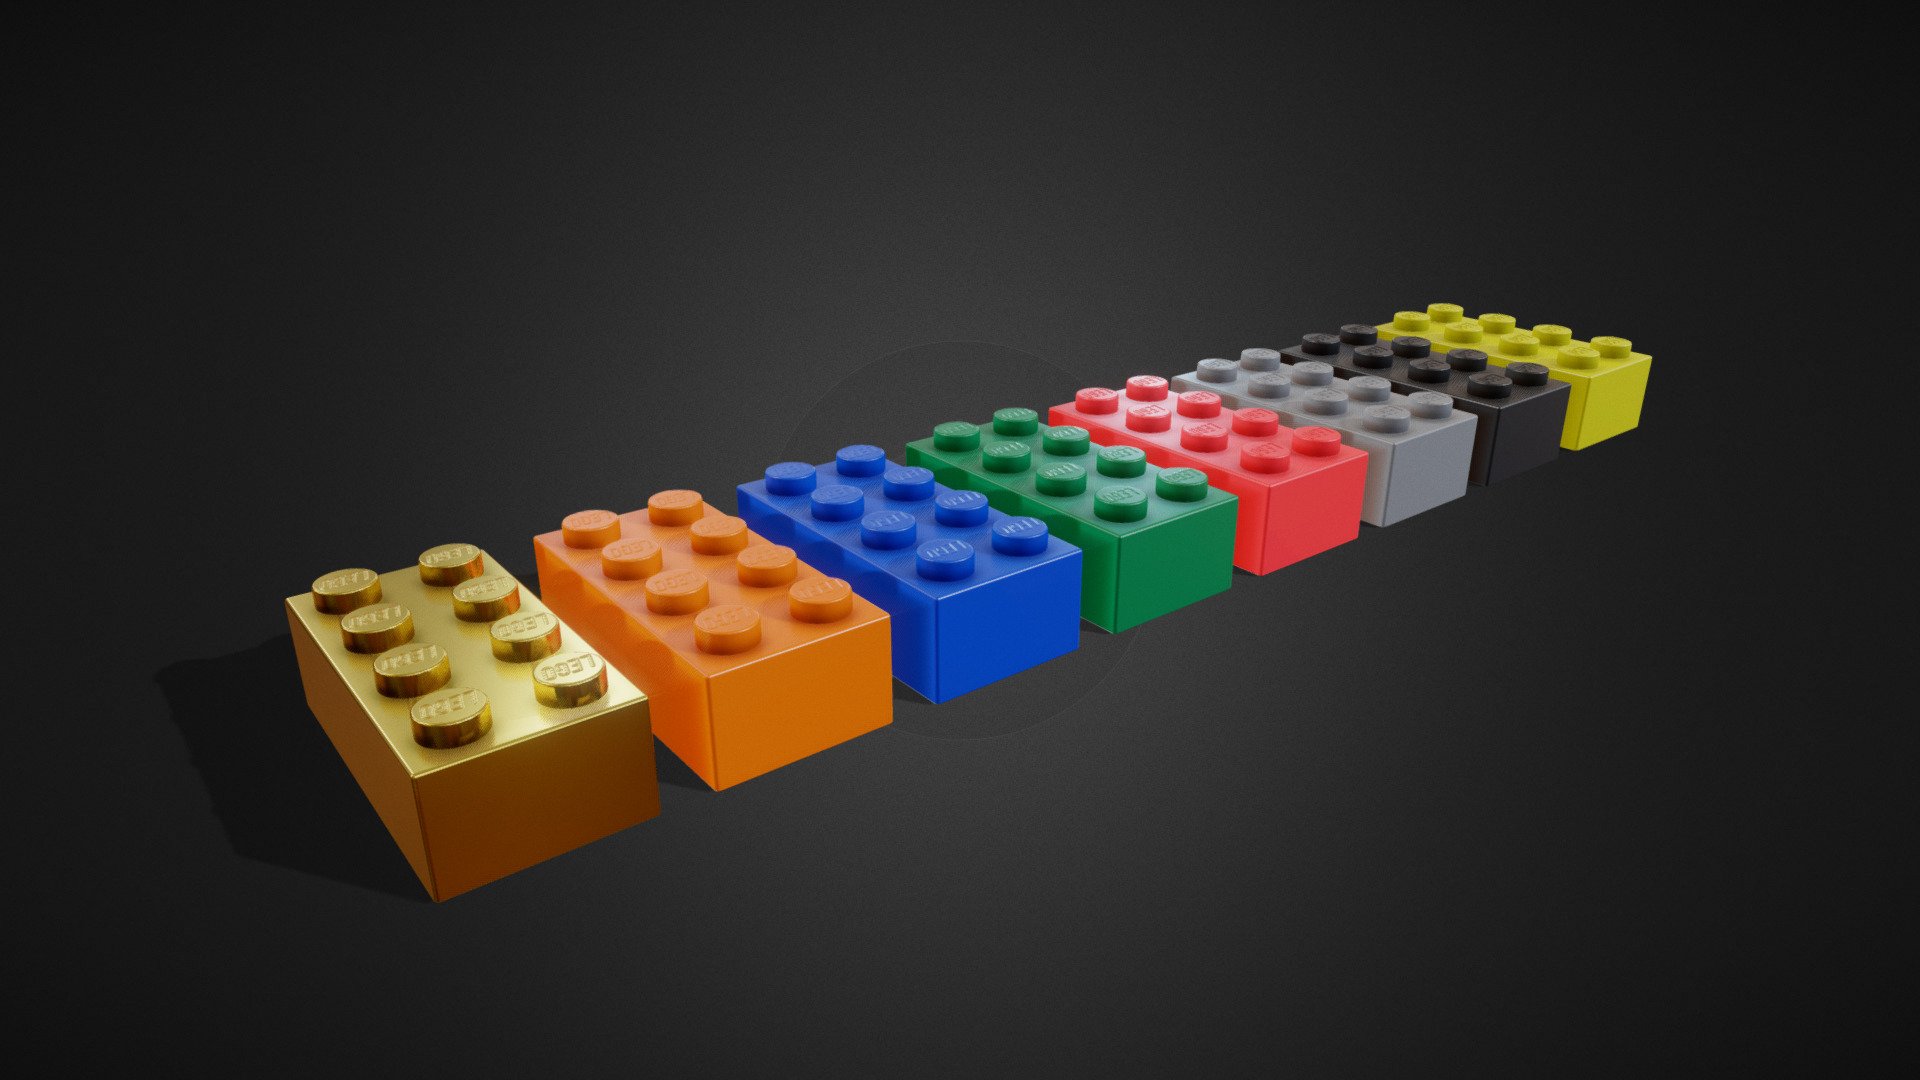 I hope I don't get in jail for that ^^'
It is exactly to scale - Lego Bricks - Download Free 3D model by BlackCube (@blackcube4) 3d model